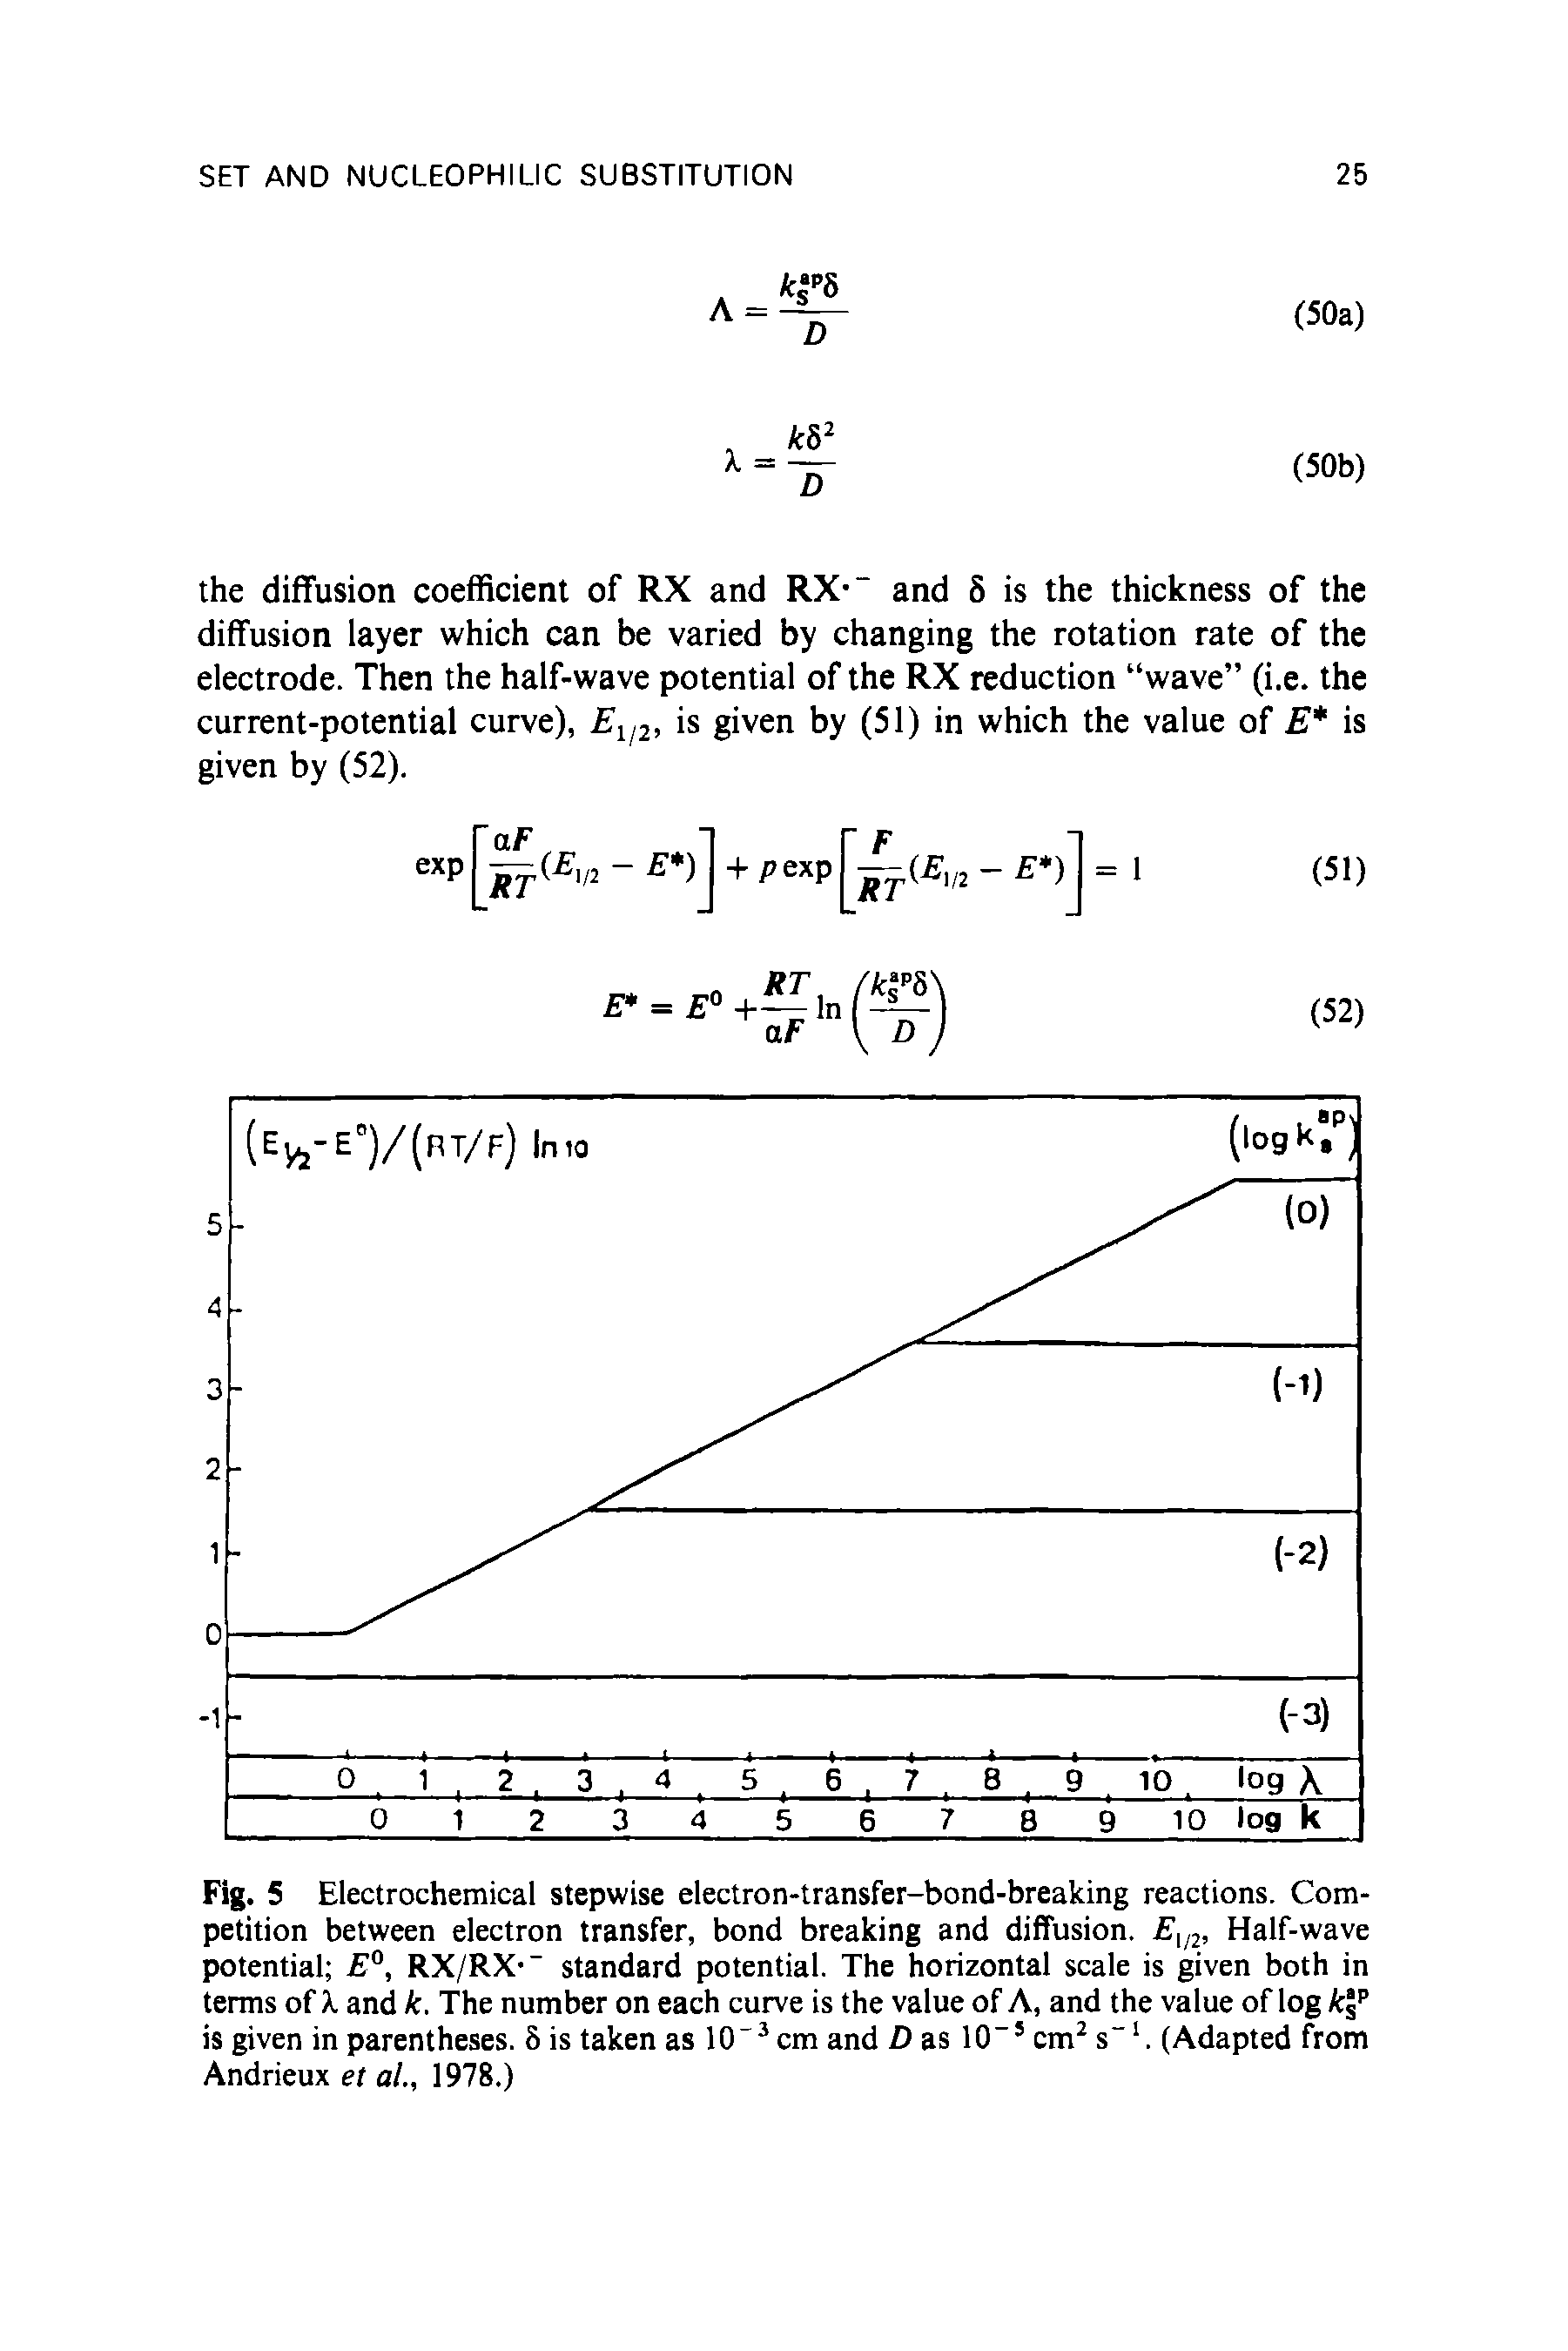 Fig. 5 Electrochemical stepwise electron-transfer-bond-breaking reactions. Competition between electron transfer, bond breaking and diffusion. E i2, Half-wave potential RX/RX- standard potential. The horizontal scale is given both in terms of X and k. The number on each curve is the value of A, and the value of log ky is given in parentheses. 5 is taken as 10 cm and D as 10" cm s" . (Adapted from Andrieux et al., 1978.)...